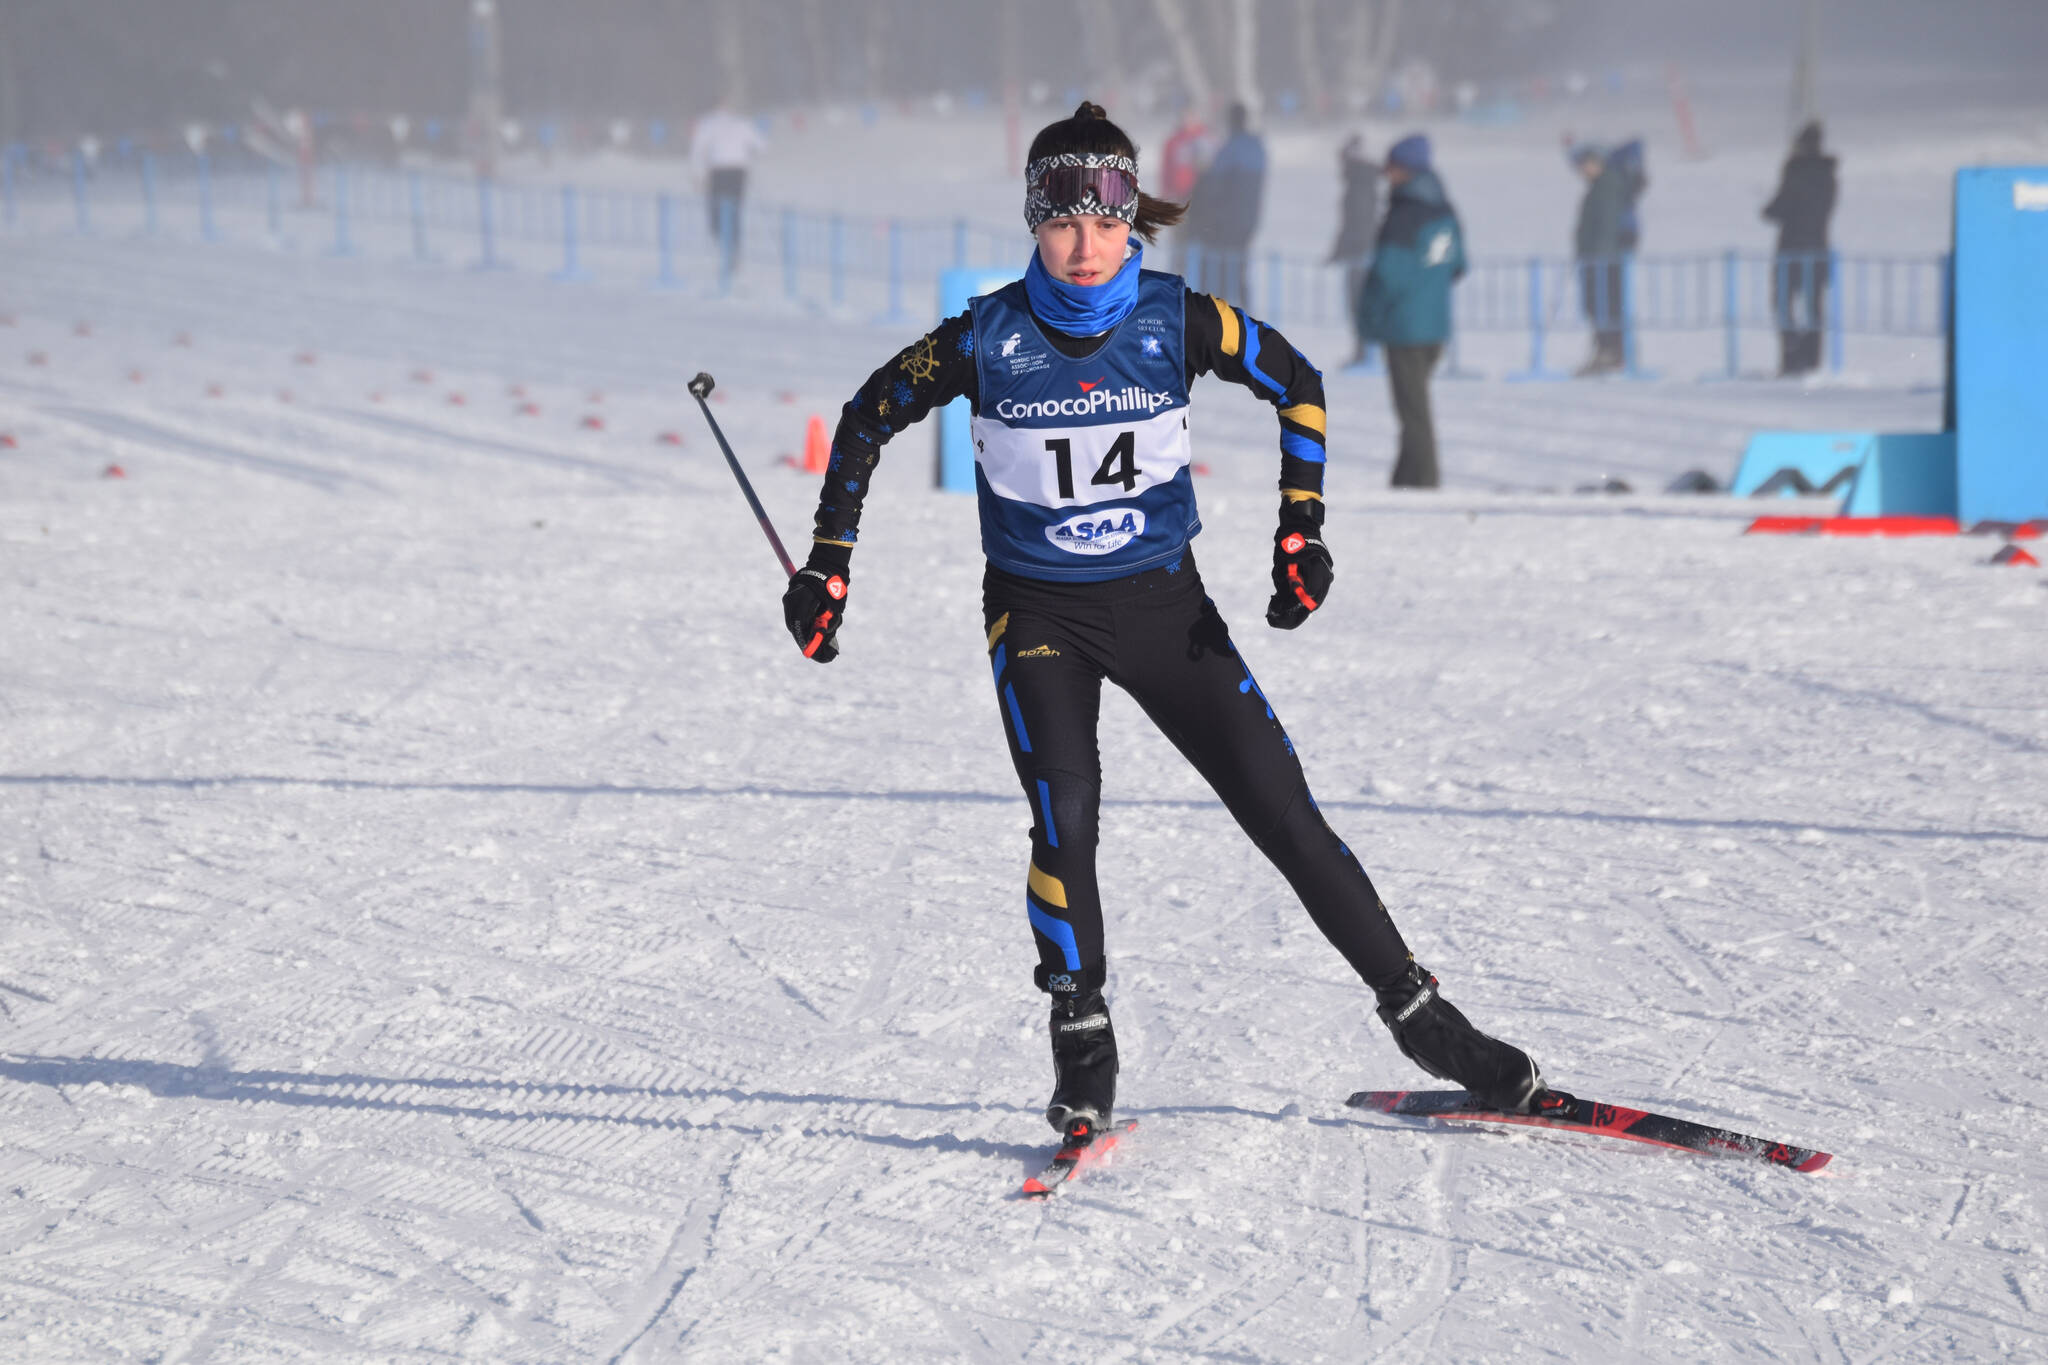 Photos by Jake Dye/Peninsula Clarion
Eryn Field, of Homer, sets out on the last leg of the girls 4x3.5-kilometer relay at the ASAA State Nordic Ski Championships at Kincaid Park in Anchorage, Alaska, on Saturday, Feb. 25, 2023.